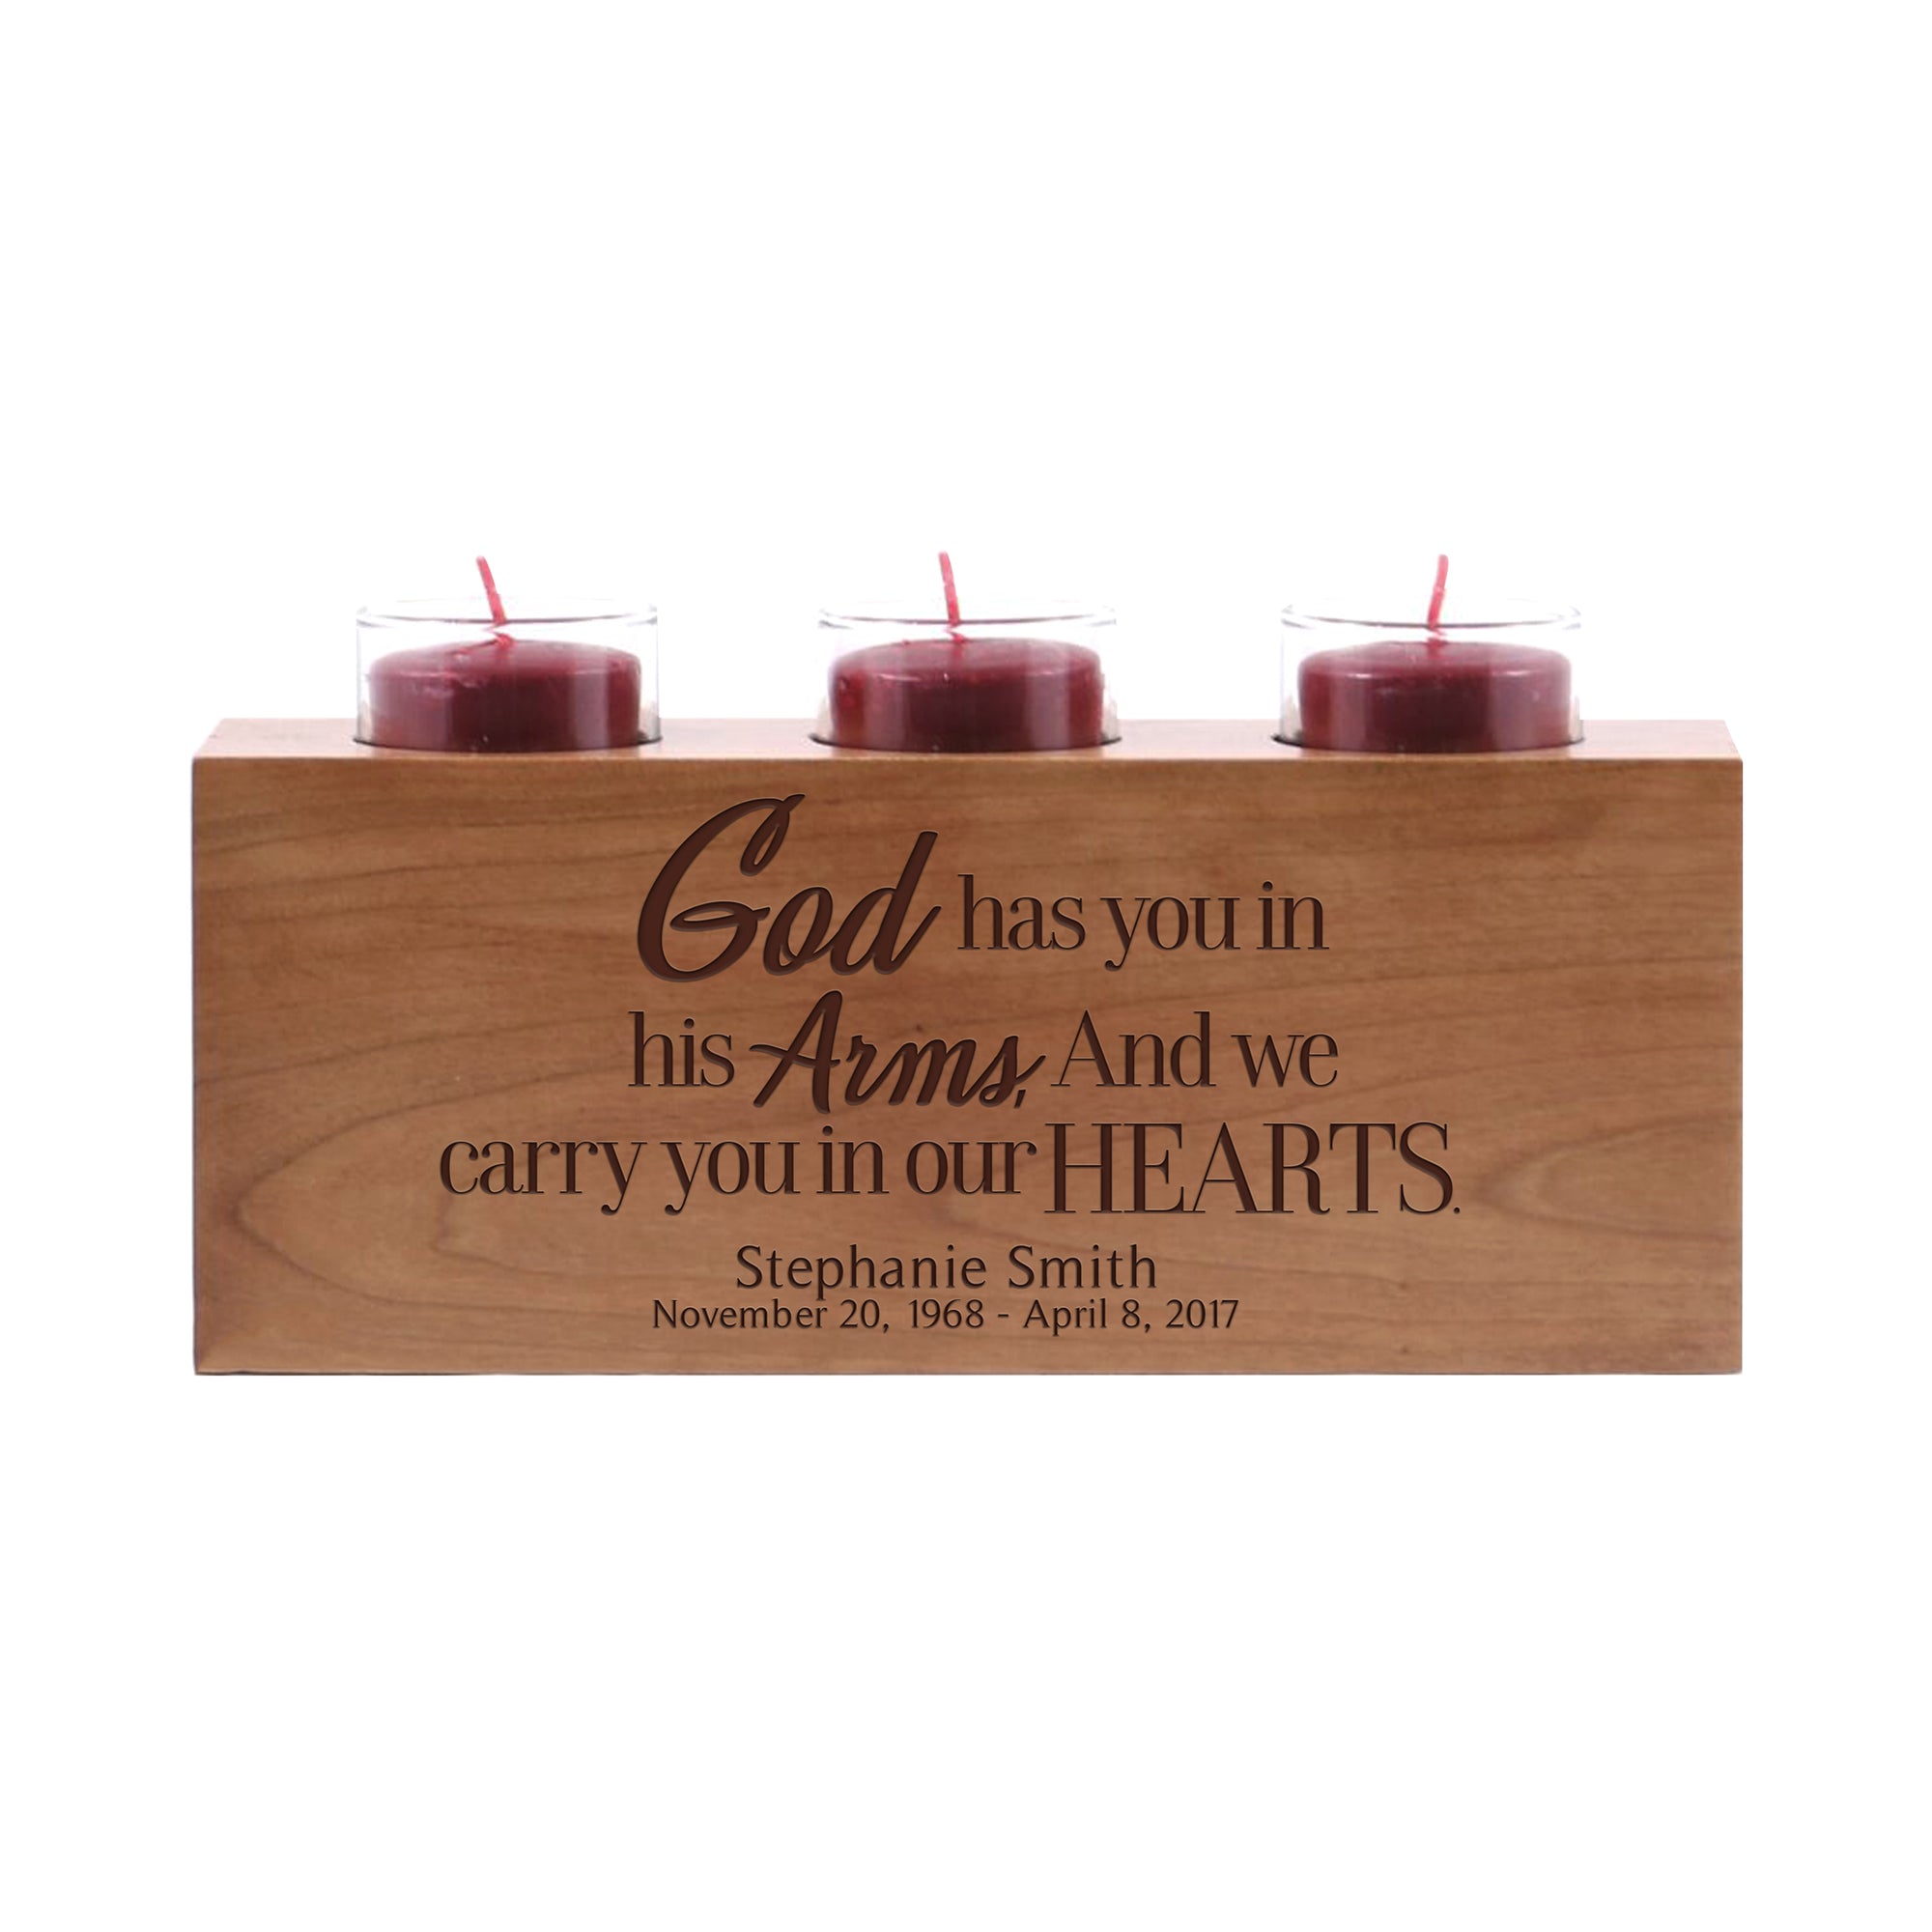 LifeSong Milestones Personalized Memorial Sympathy 3 Votive Candle Holder - God Has You Engraved Tea Light Candle Loss of Loved One Gift - 10” x 4” x 4”.